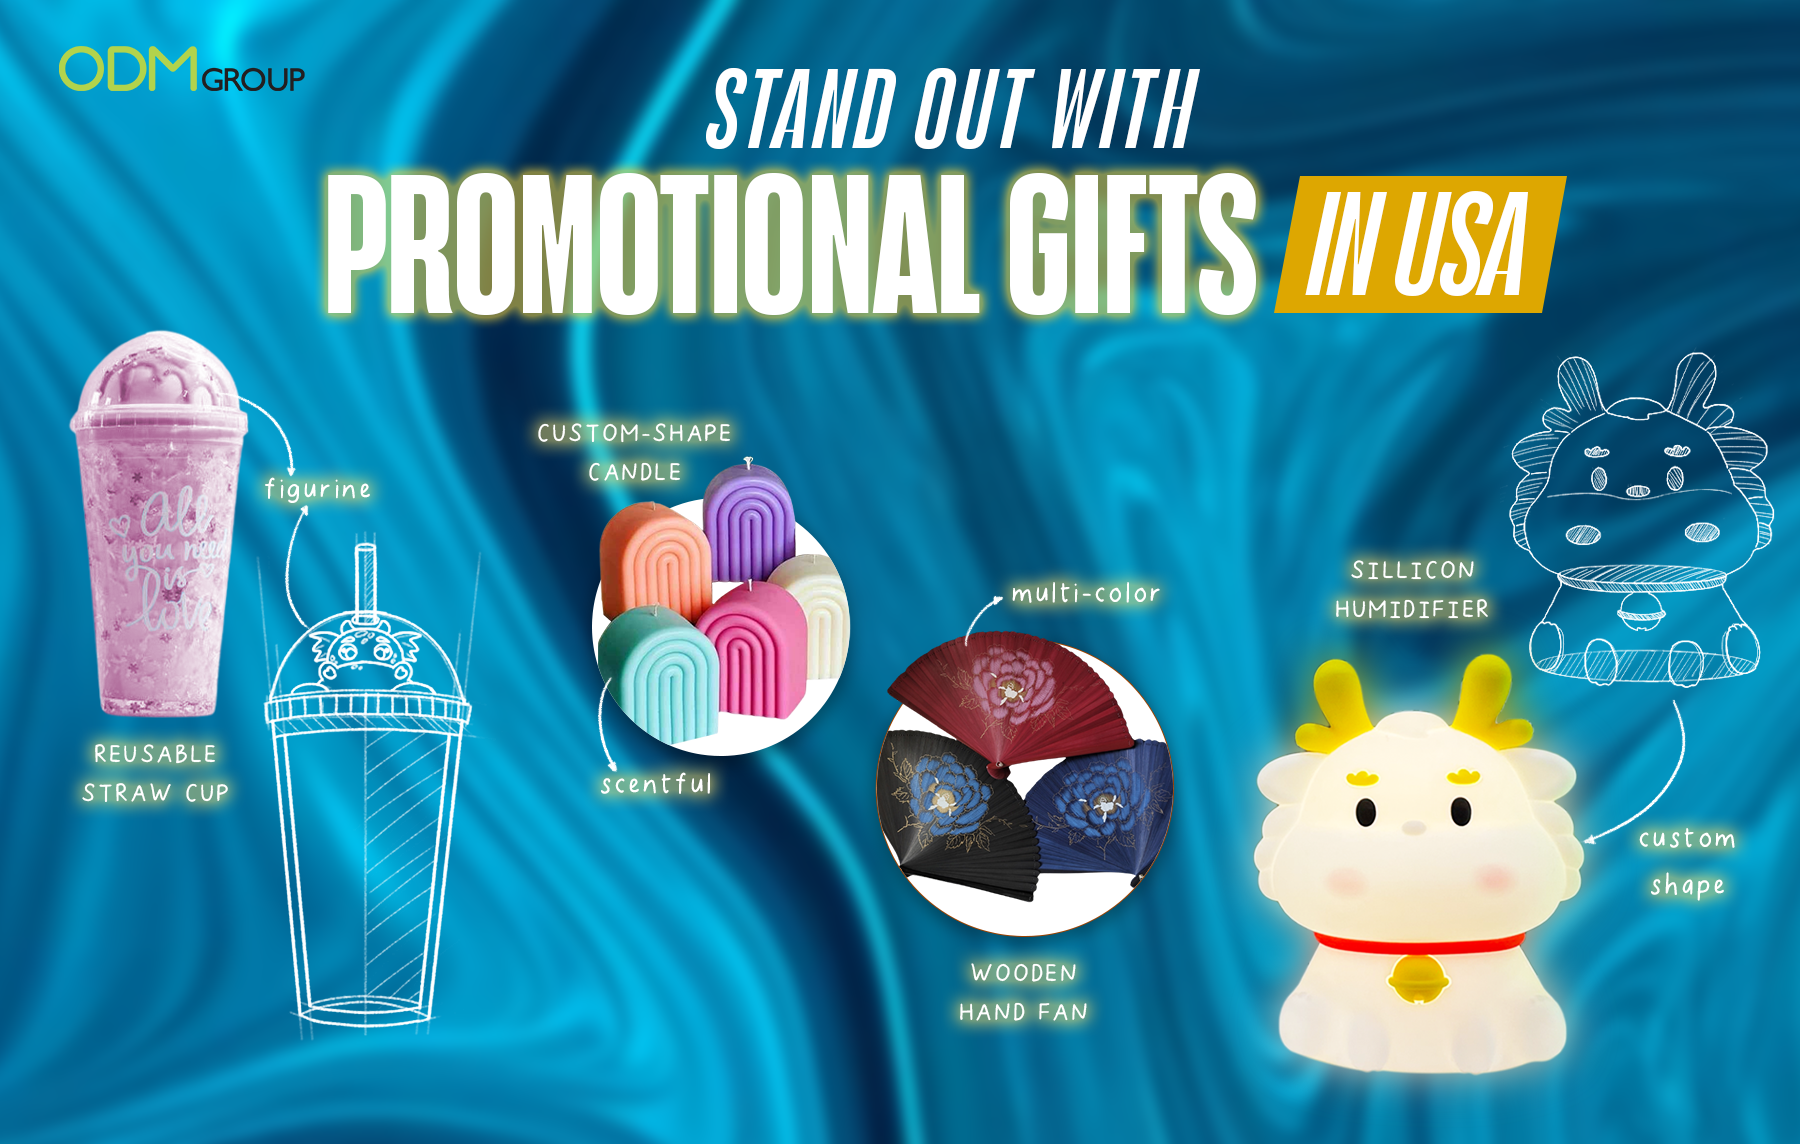 promotional gifts in USA